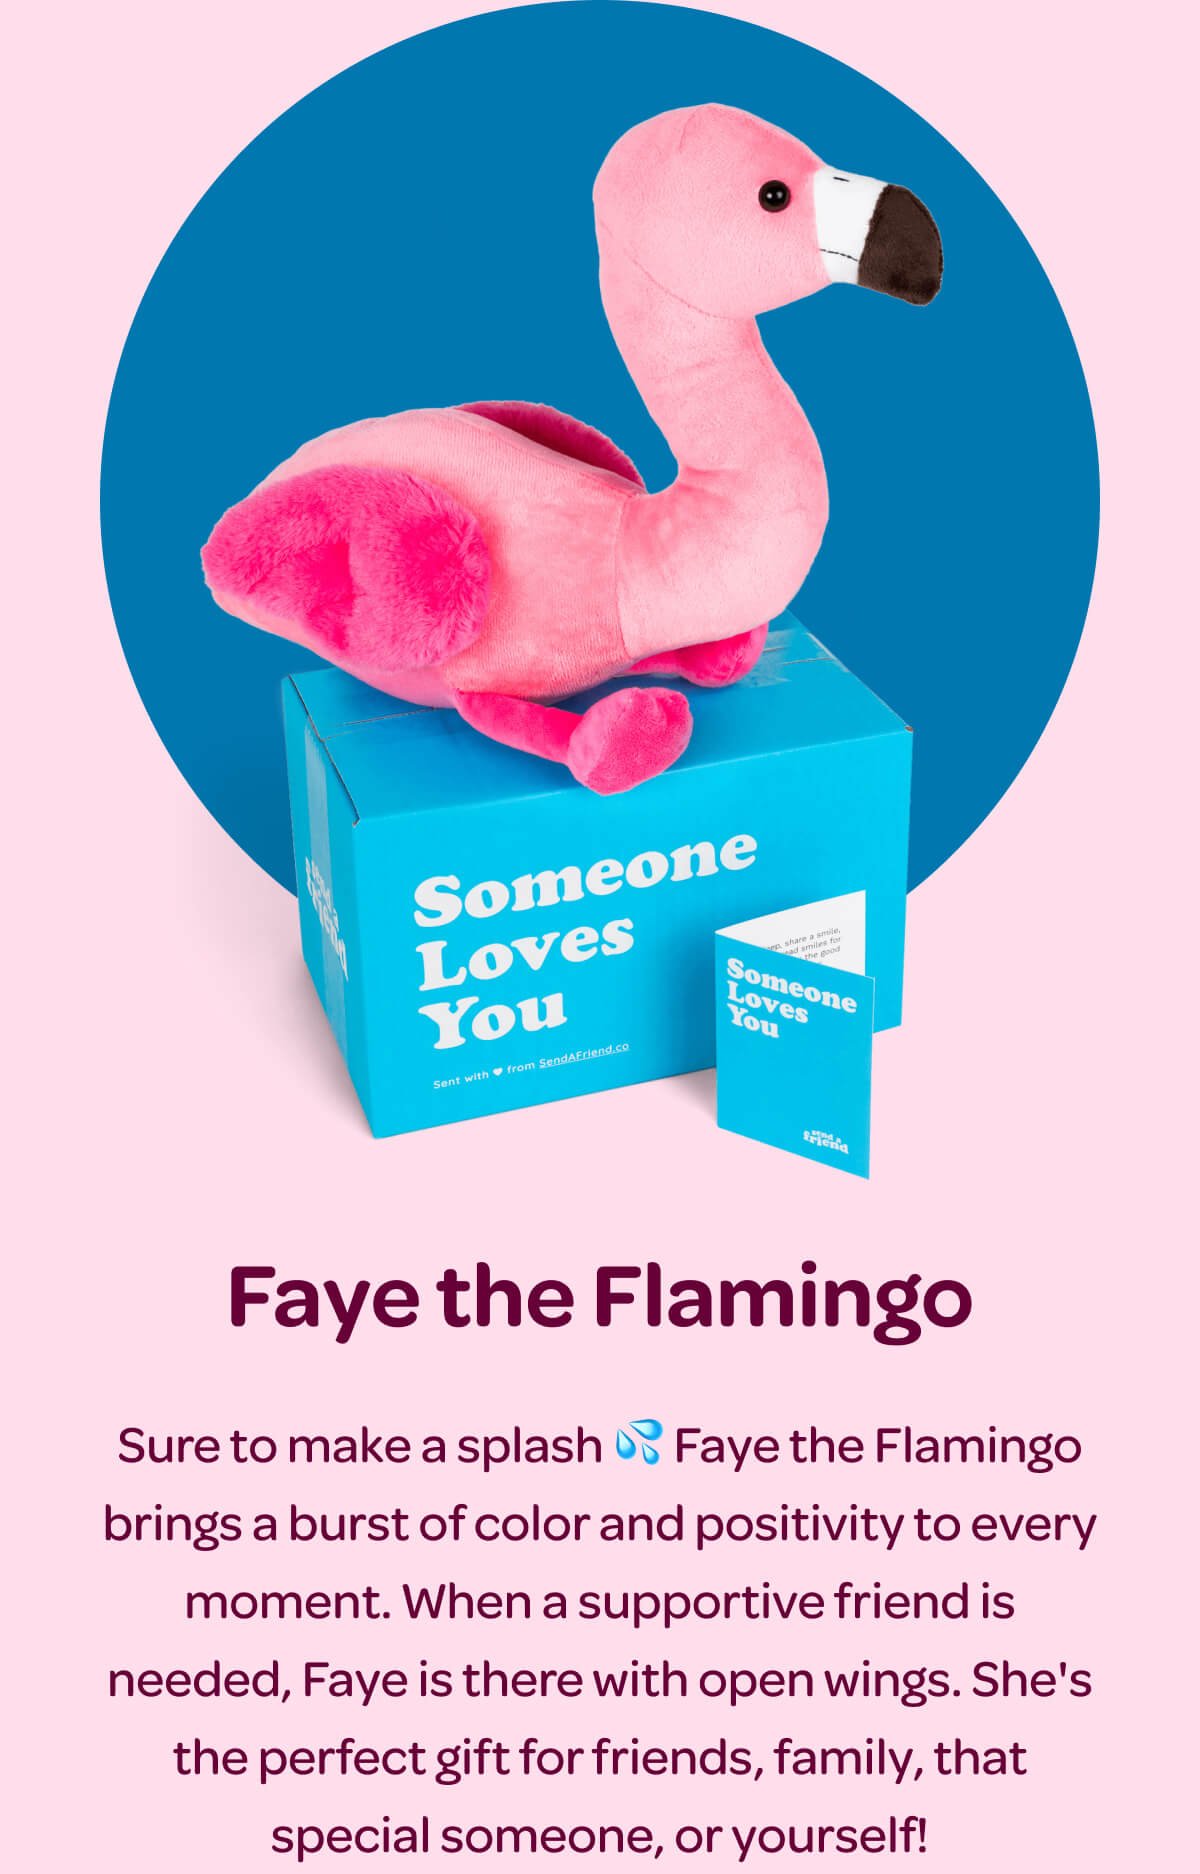 Faye the Flamingo. Sure to make a splash 💦 Faye the Flamingo brings a burst of color and positivity to every moment. When a supportive friend is needed, Faye is there with open wings. She's the perfect gift for friends, family, that special someone, or yourself!